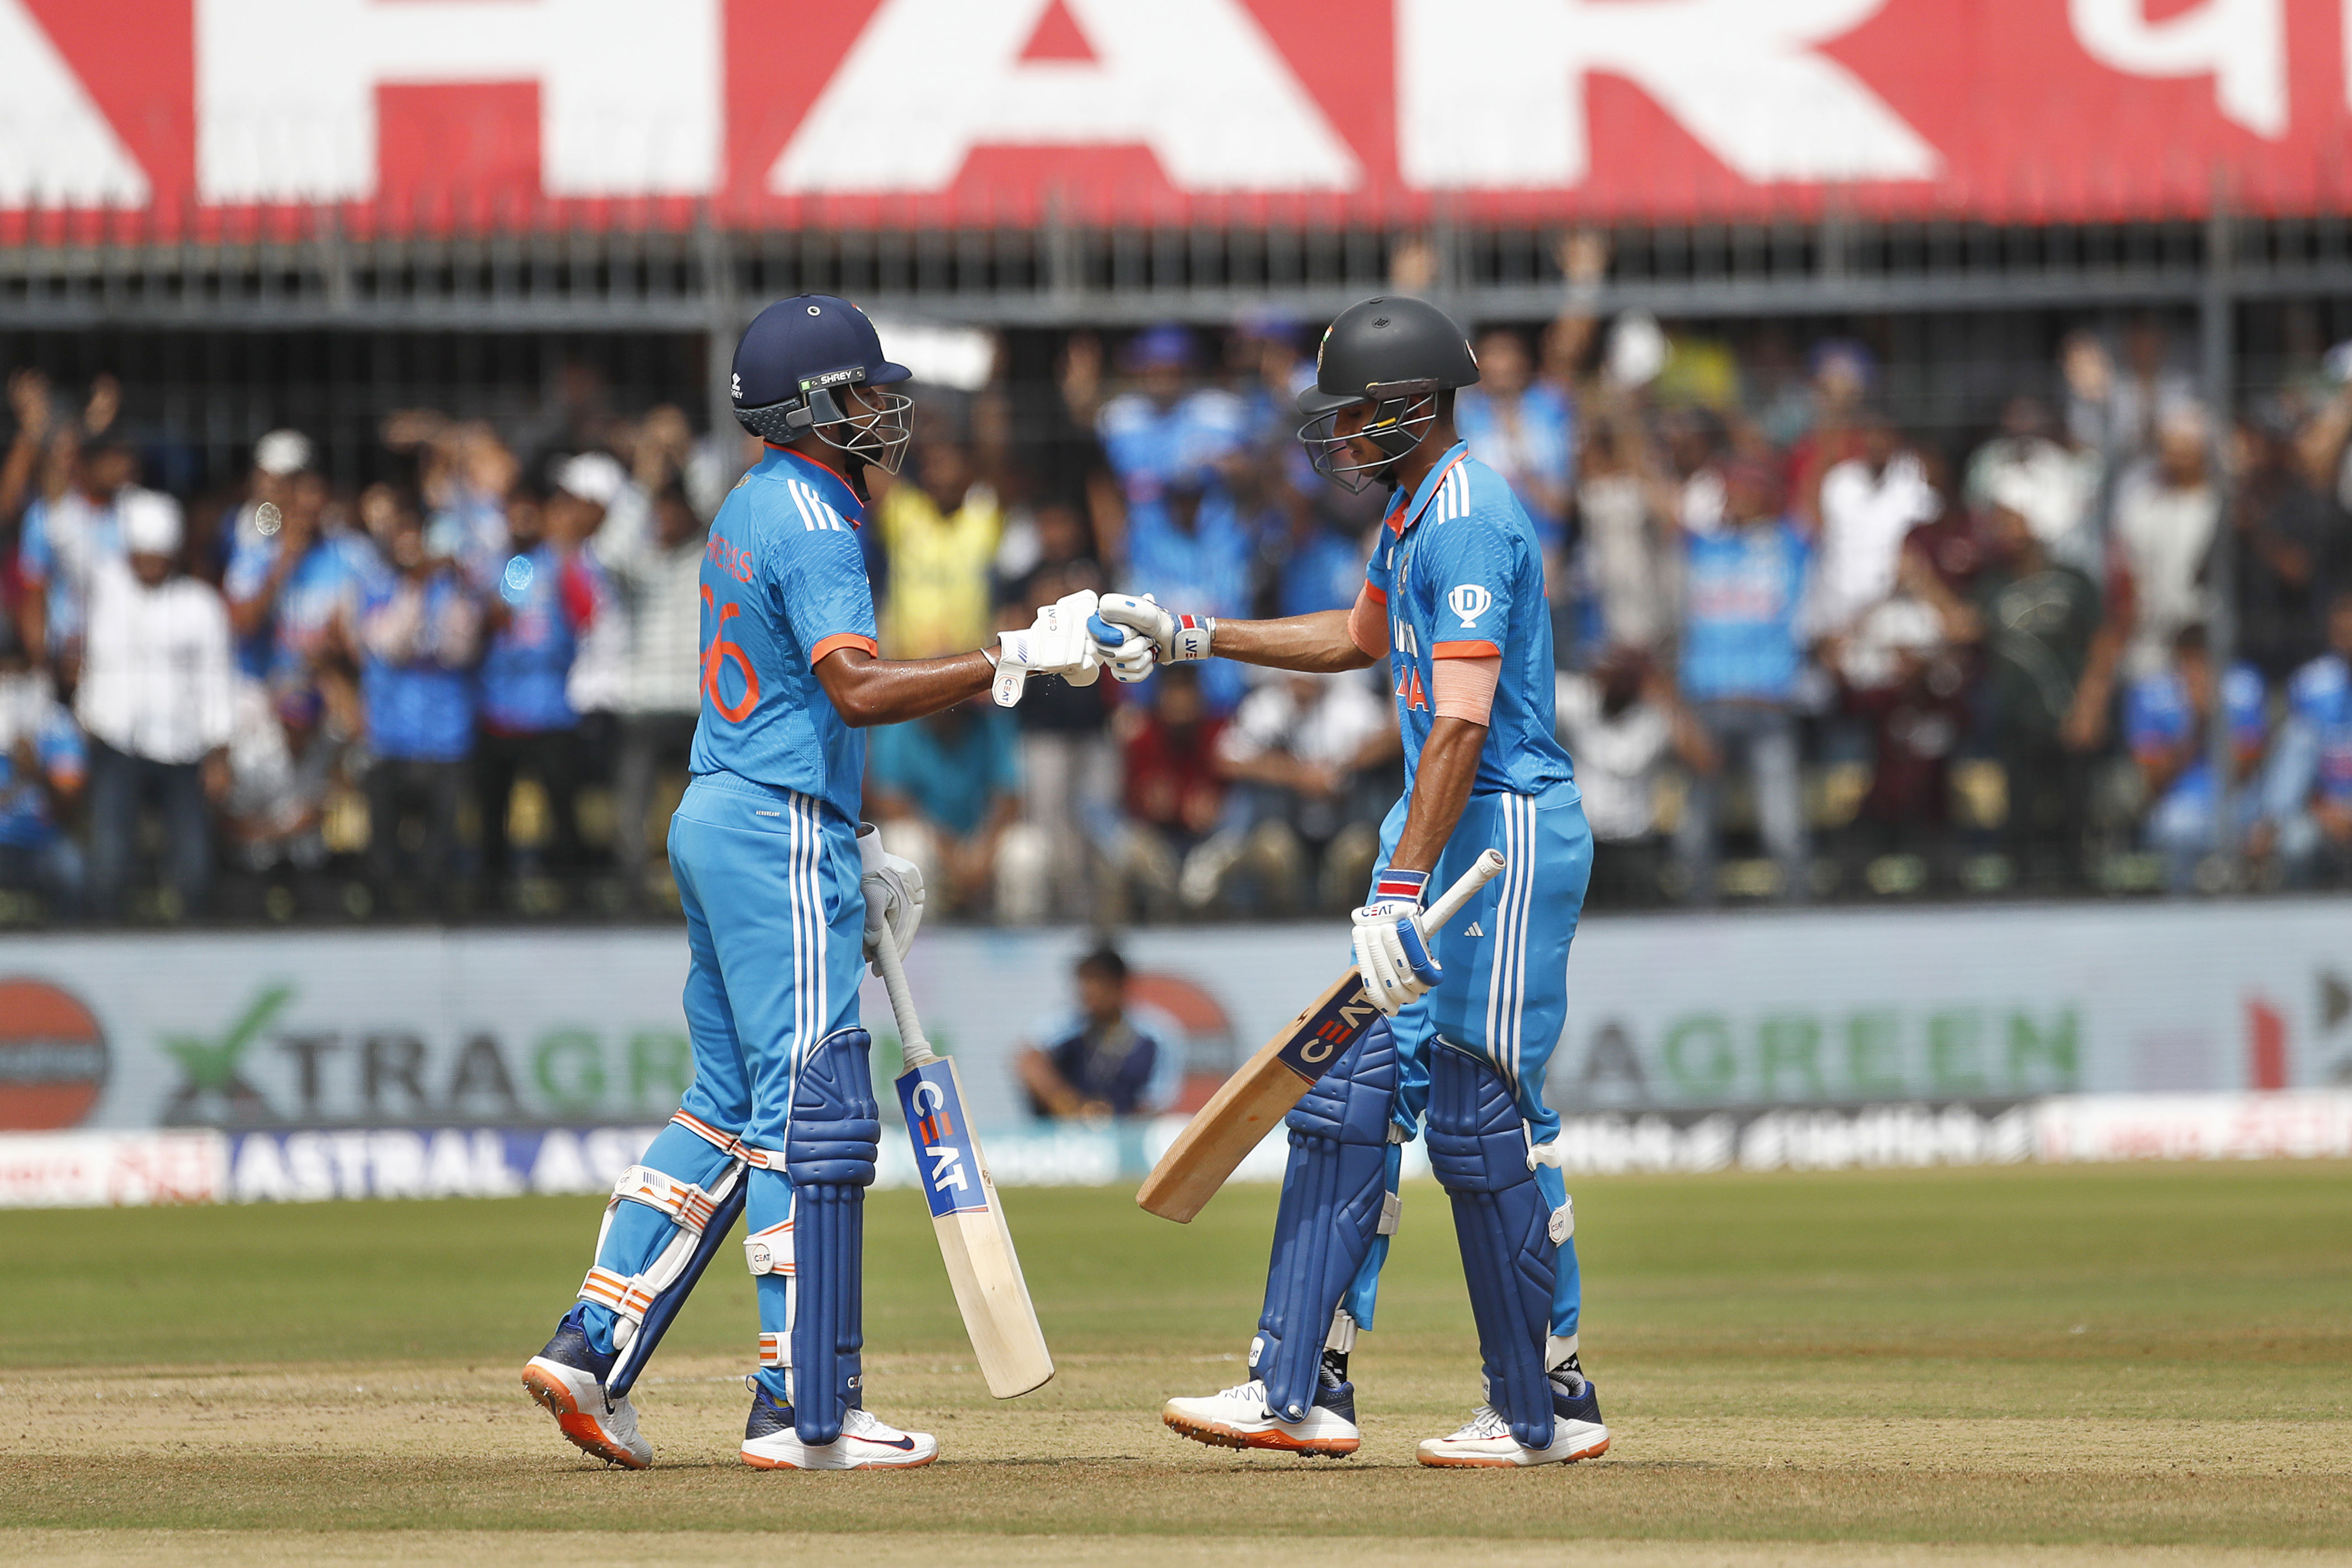 India vs Australia Live updates, scores, result and highlights from 2nd ODI as SKYs late blitz helps India post 399